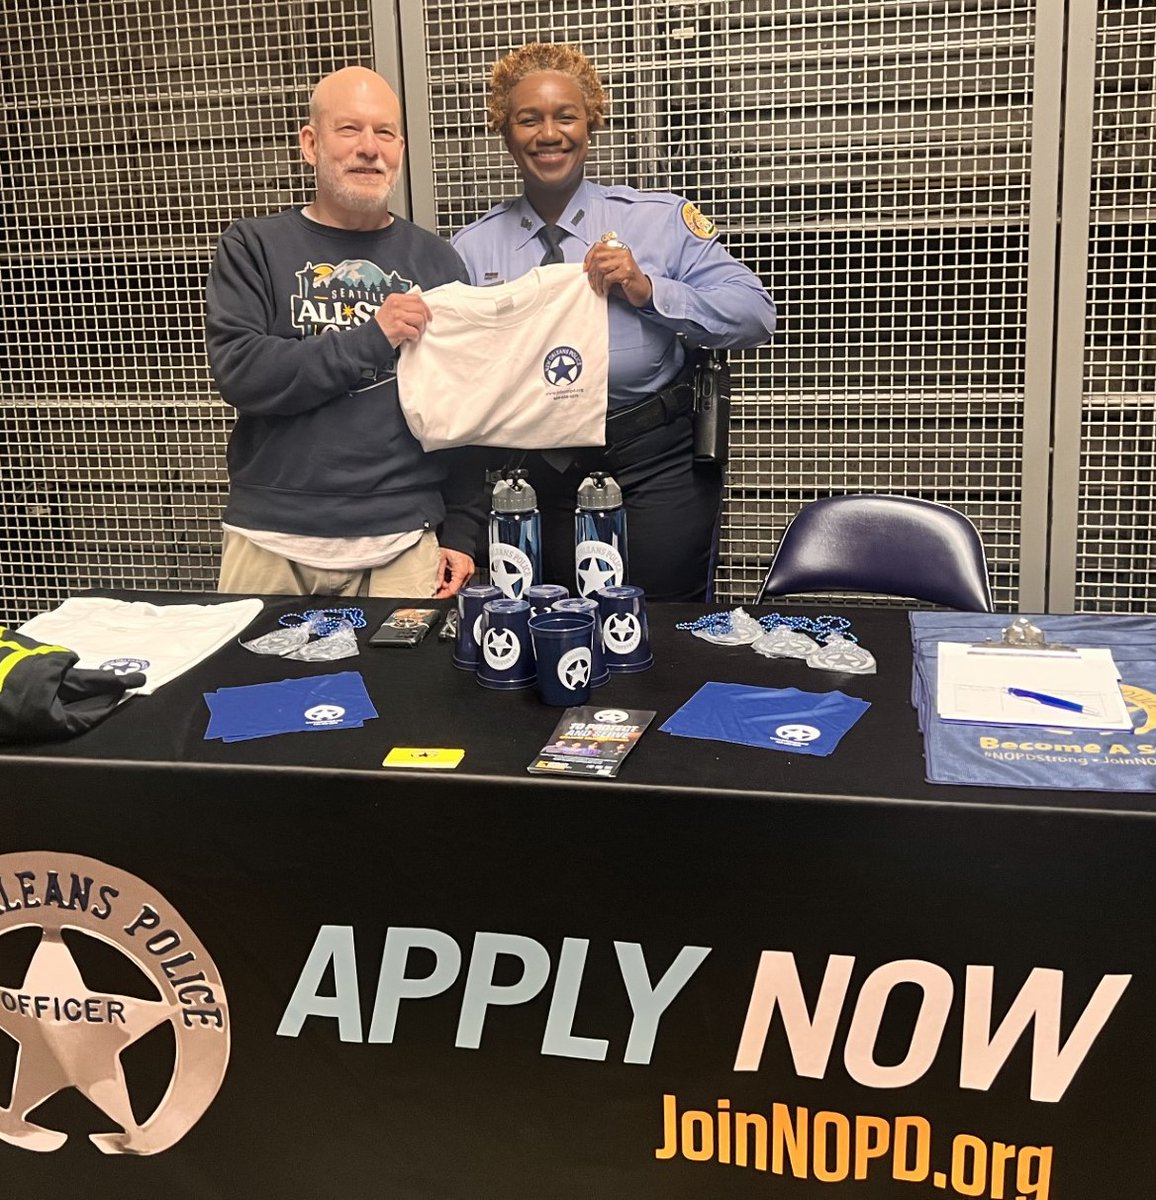 👮🏀In case you missed us at the Pels game last night- our NOPD Recruiters will be holding a JOB Fair on May 15th at the New Orleans Baptist Theological Seminary. We hope to see you there! #StrongerTogether #joinnopd